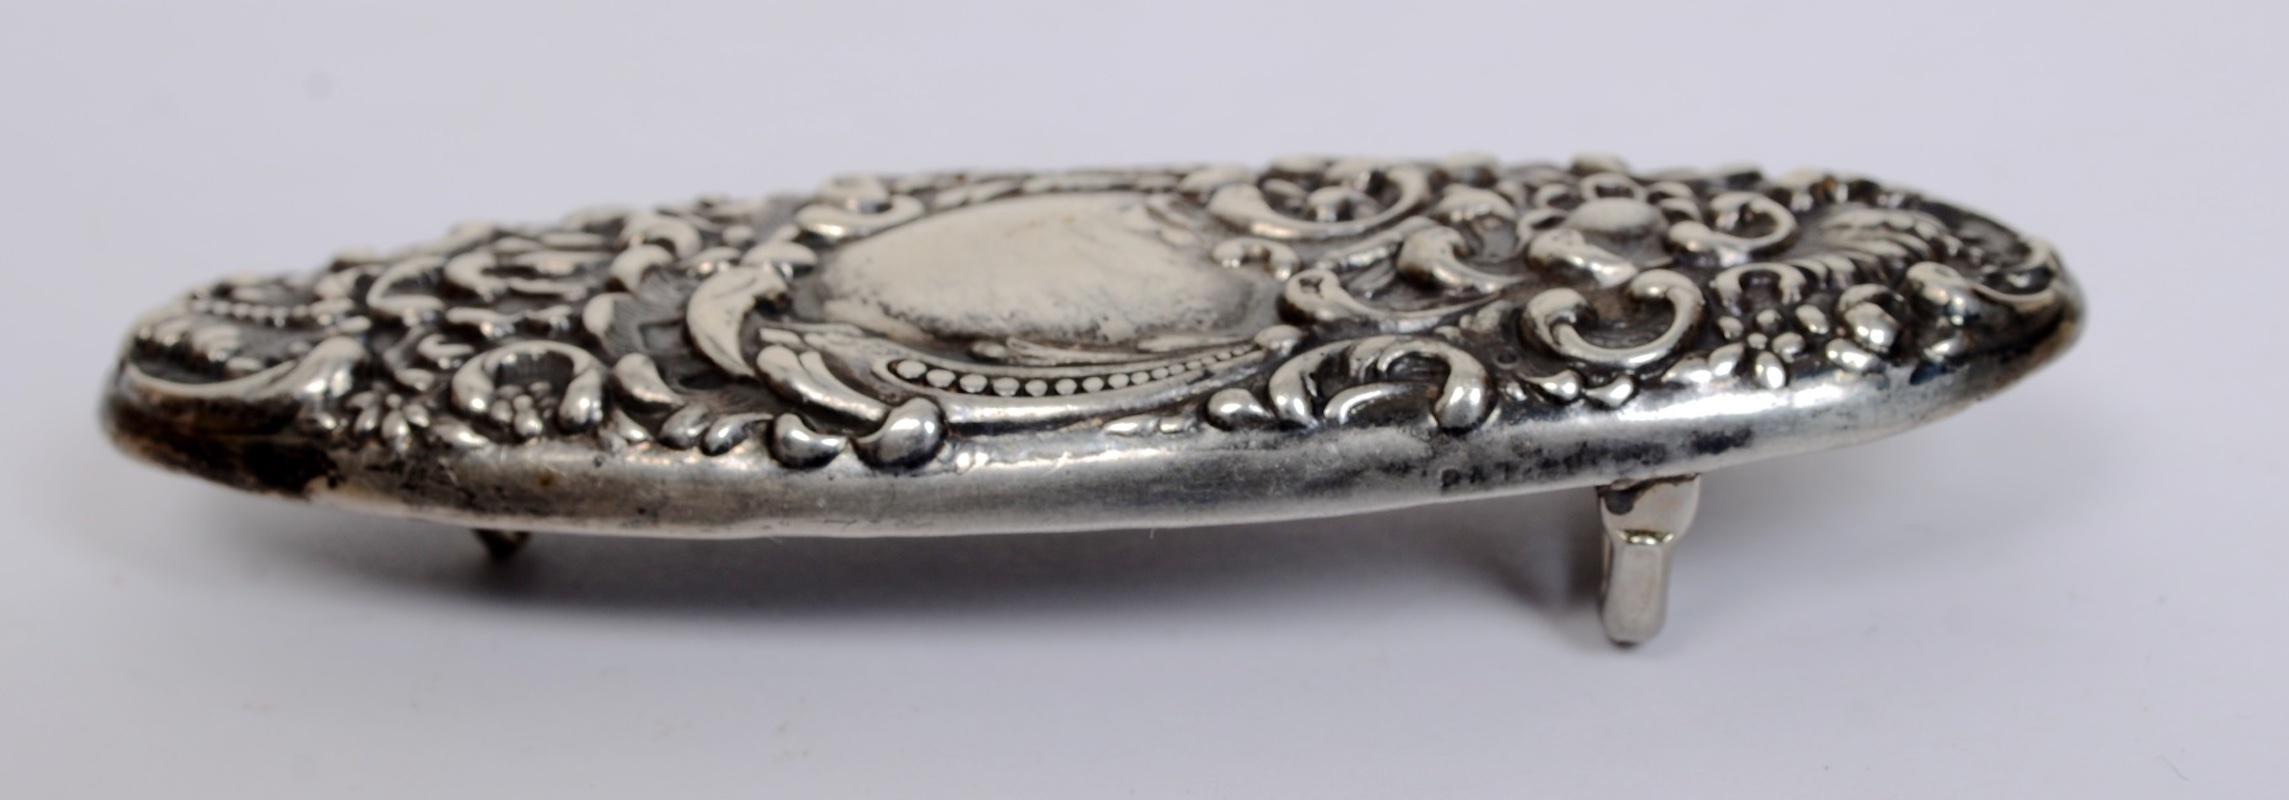 Sterling Silver Floral and Leaf Decorated Sash Belt Buckle, c1840 In Excellent Condition For Sale In valatie, NY